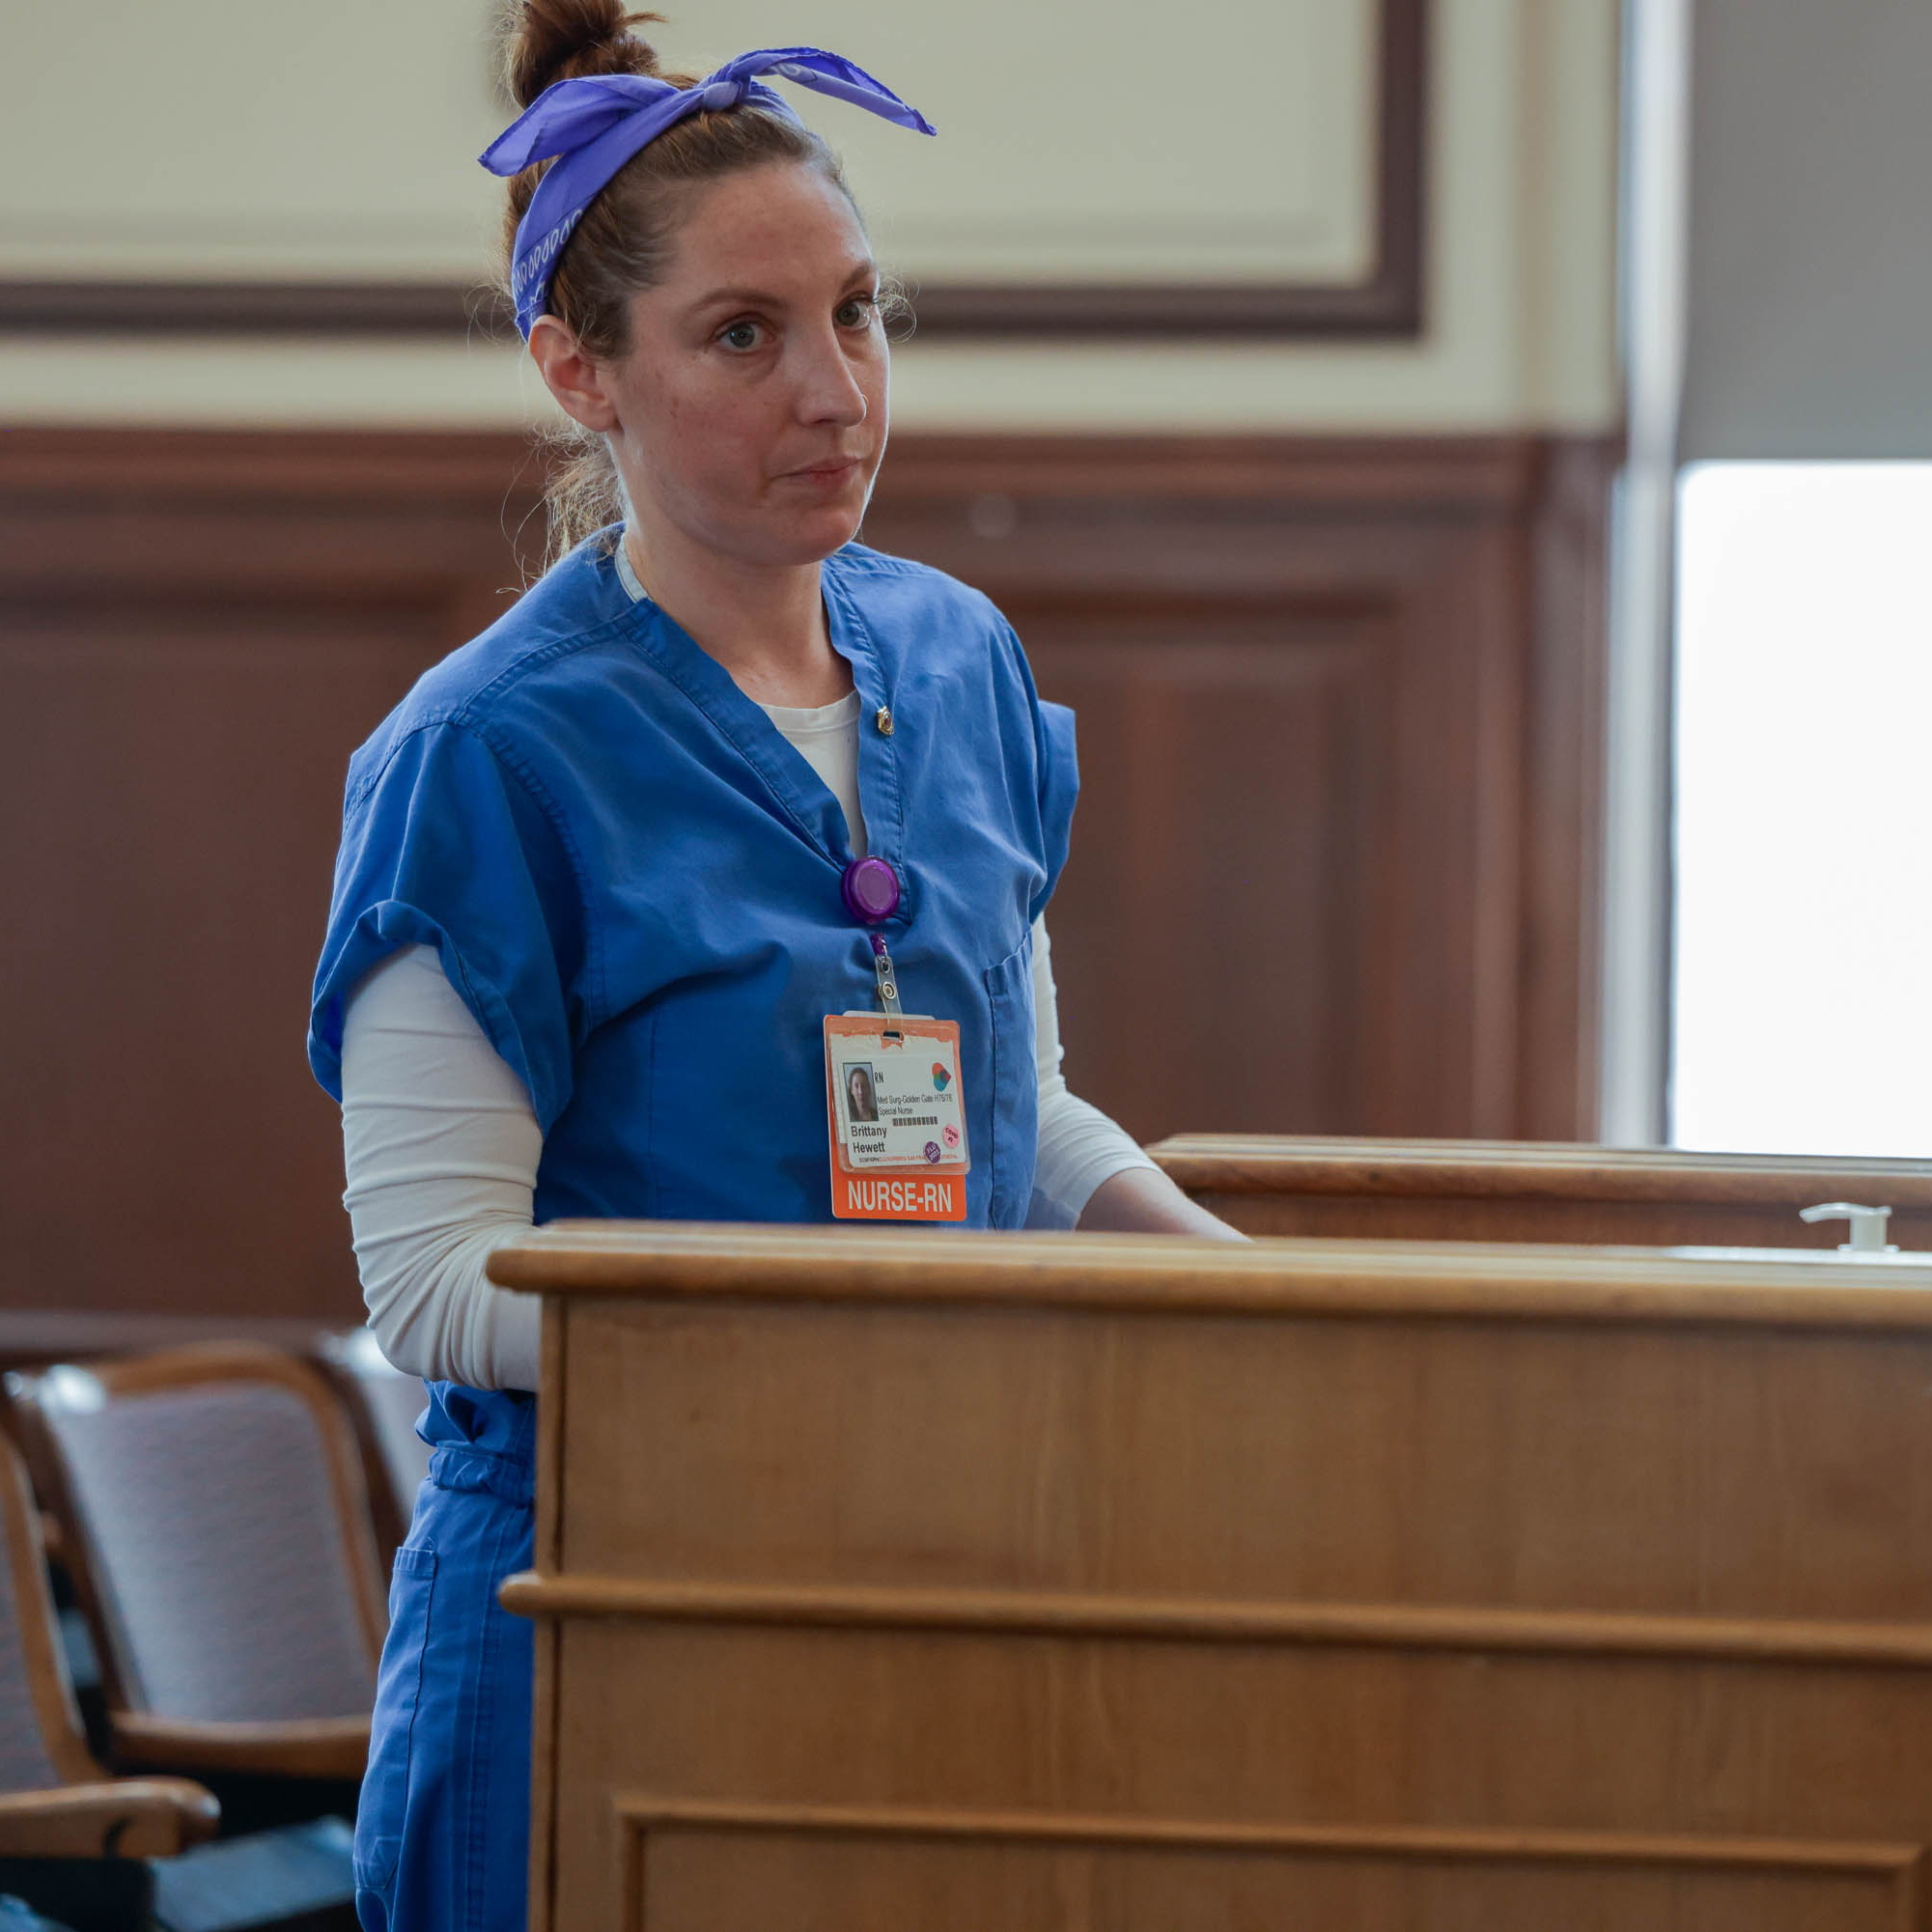 A nurse in blue scrubs stands by a wooden bench, her name badge visible.